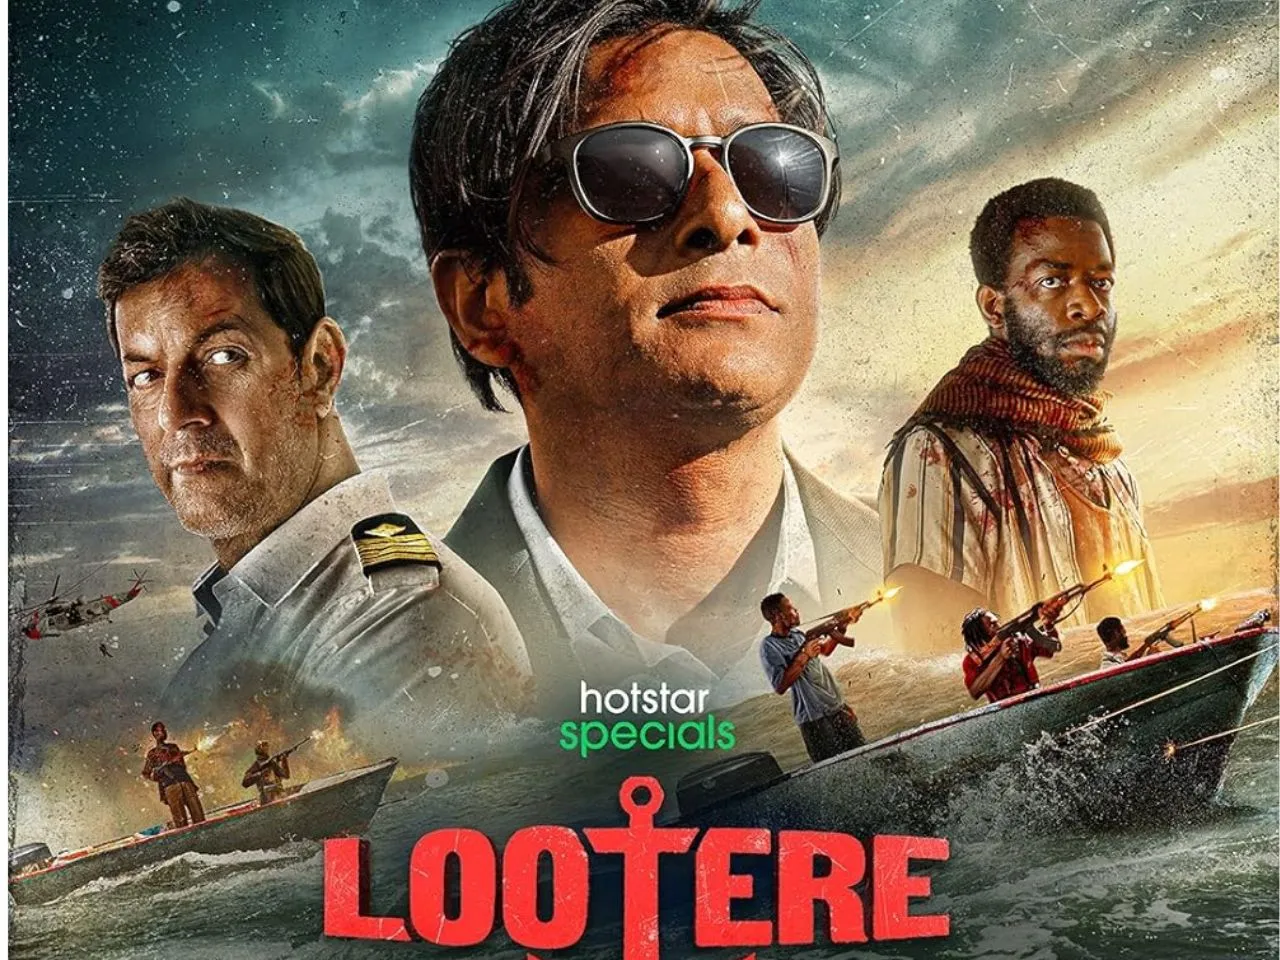 Lootere review: Lost in the waves of mediocrity